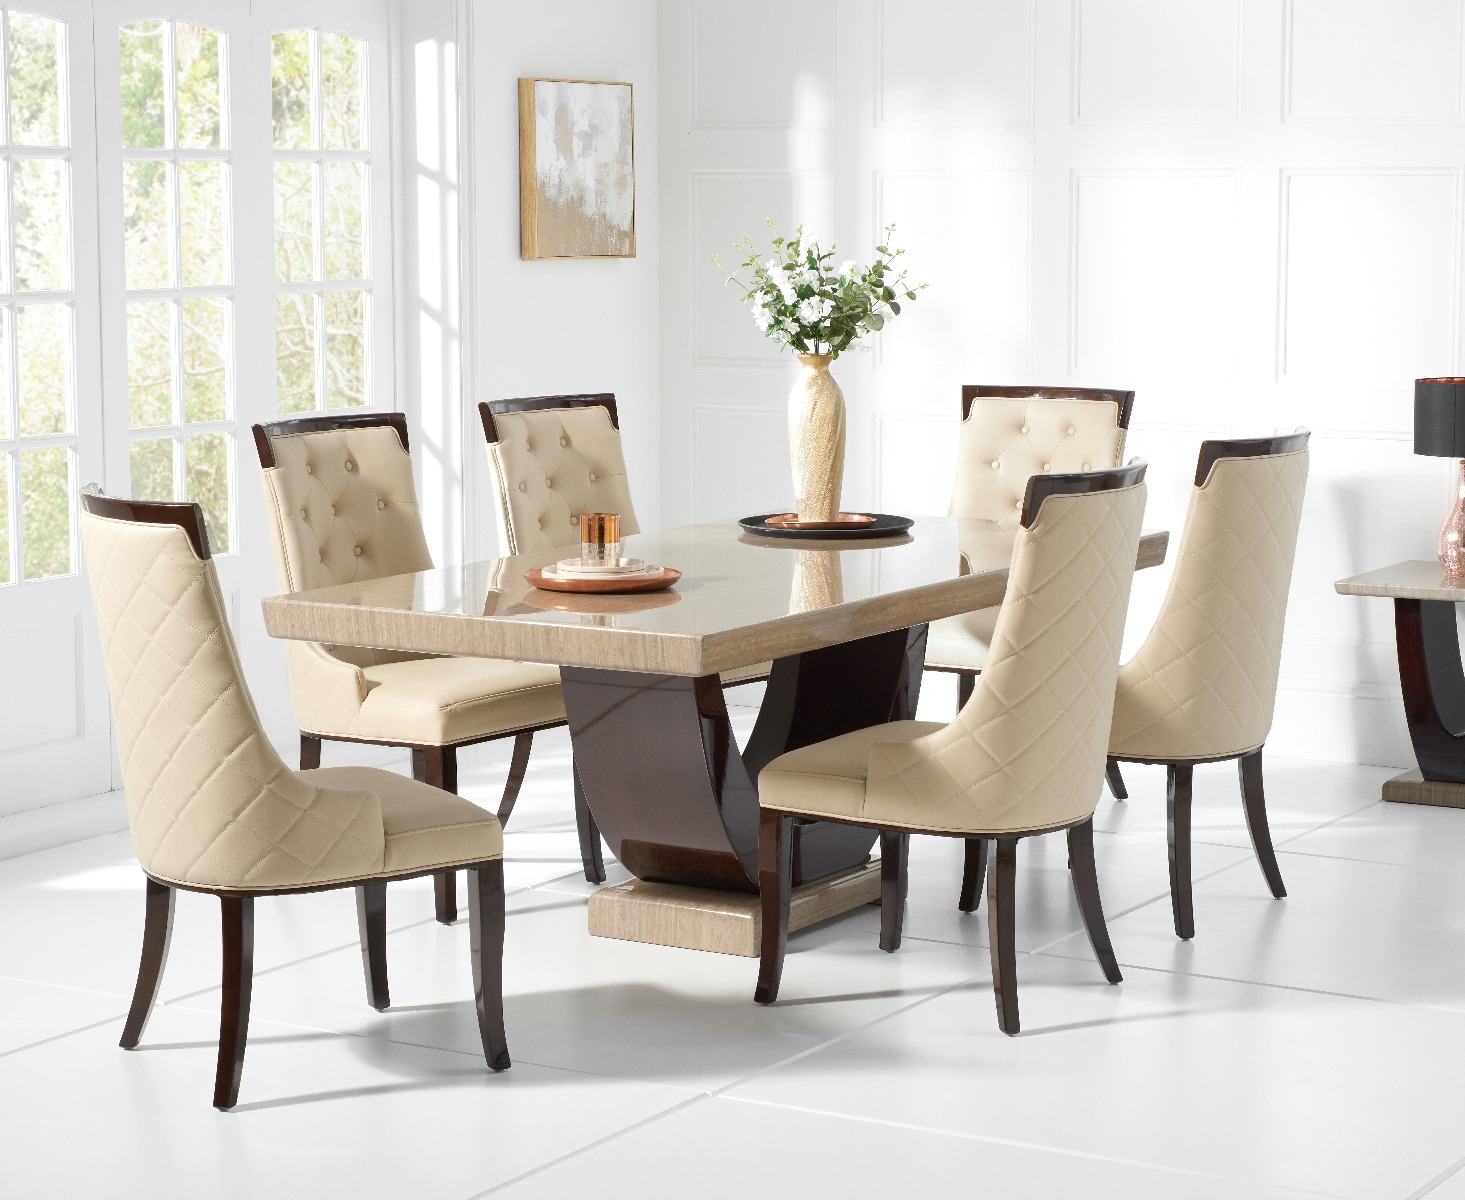 Novara 170cm Brown Pedestal Marble Dining Table With 6 Cream Francesca Chairs